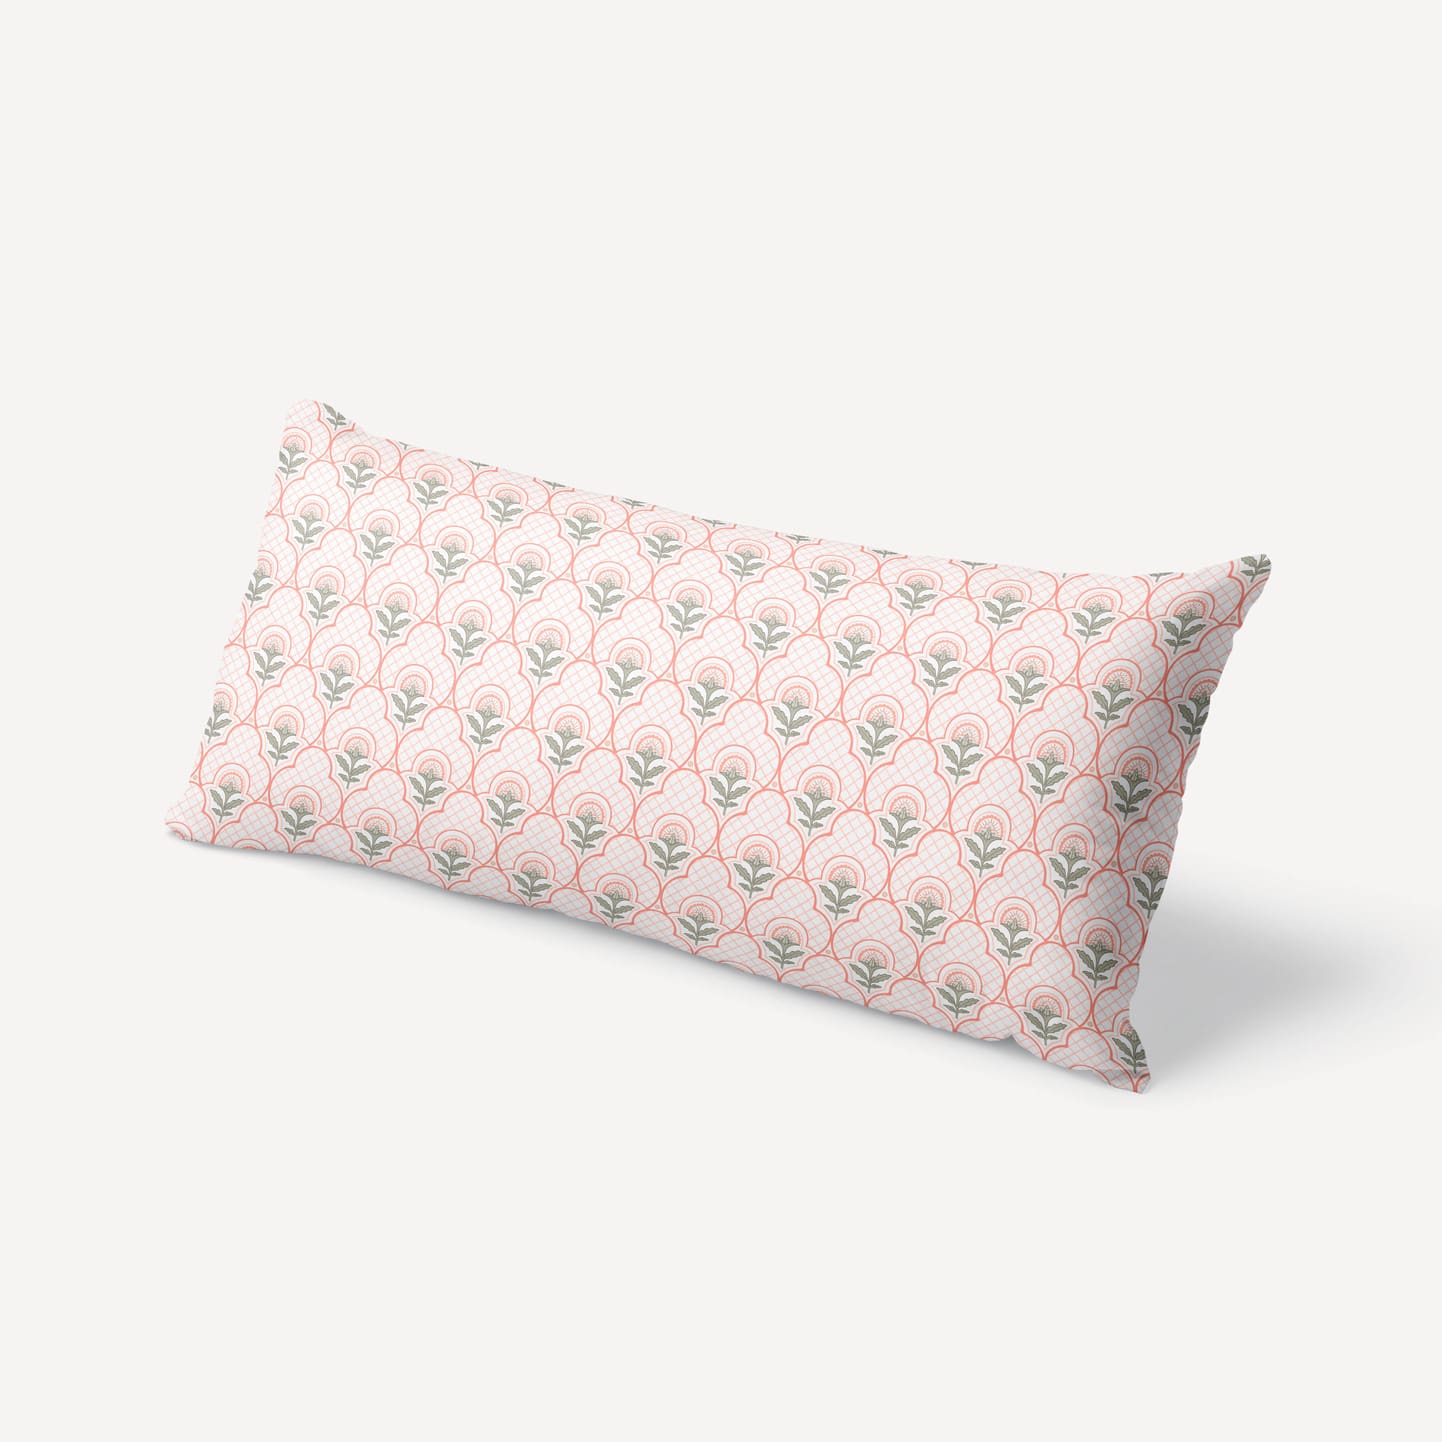 Amelia XL Lumbar Pillow in Coral Olive